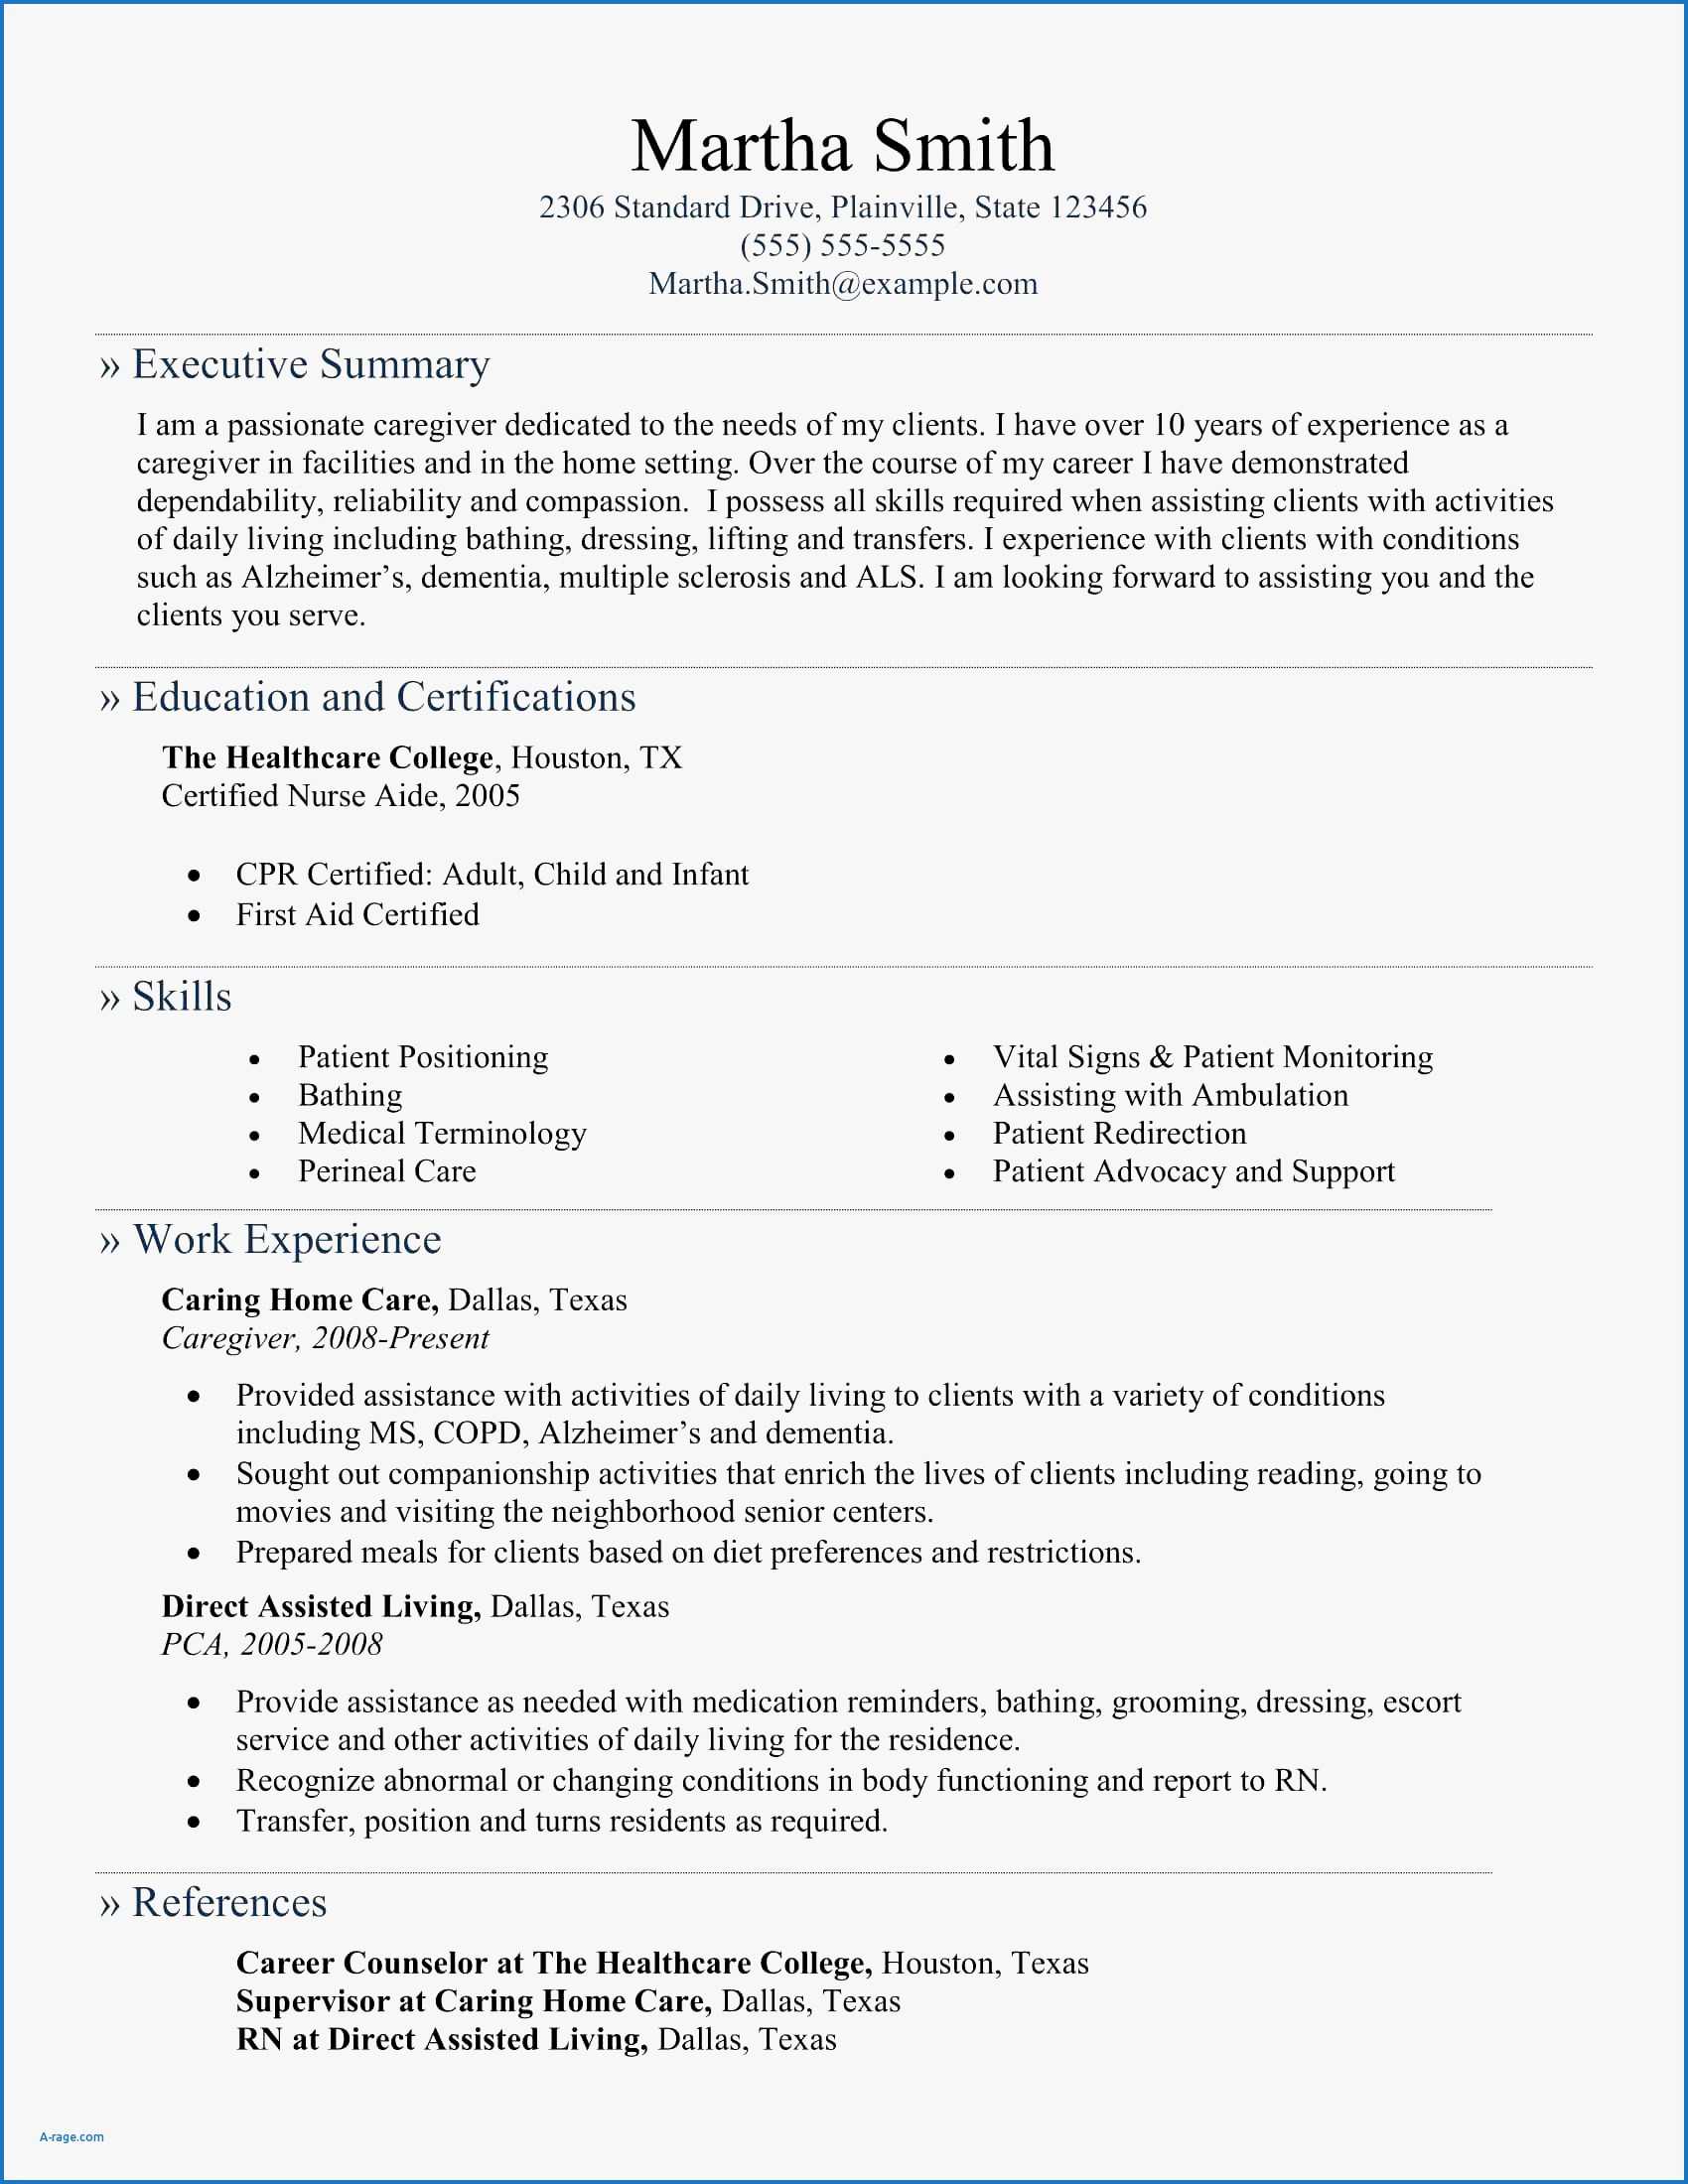 Nutritional Advisor Cover Letter New Clinical Counselor In Community Service Template Word